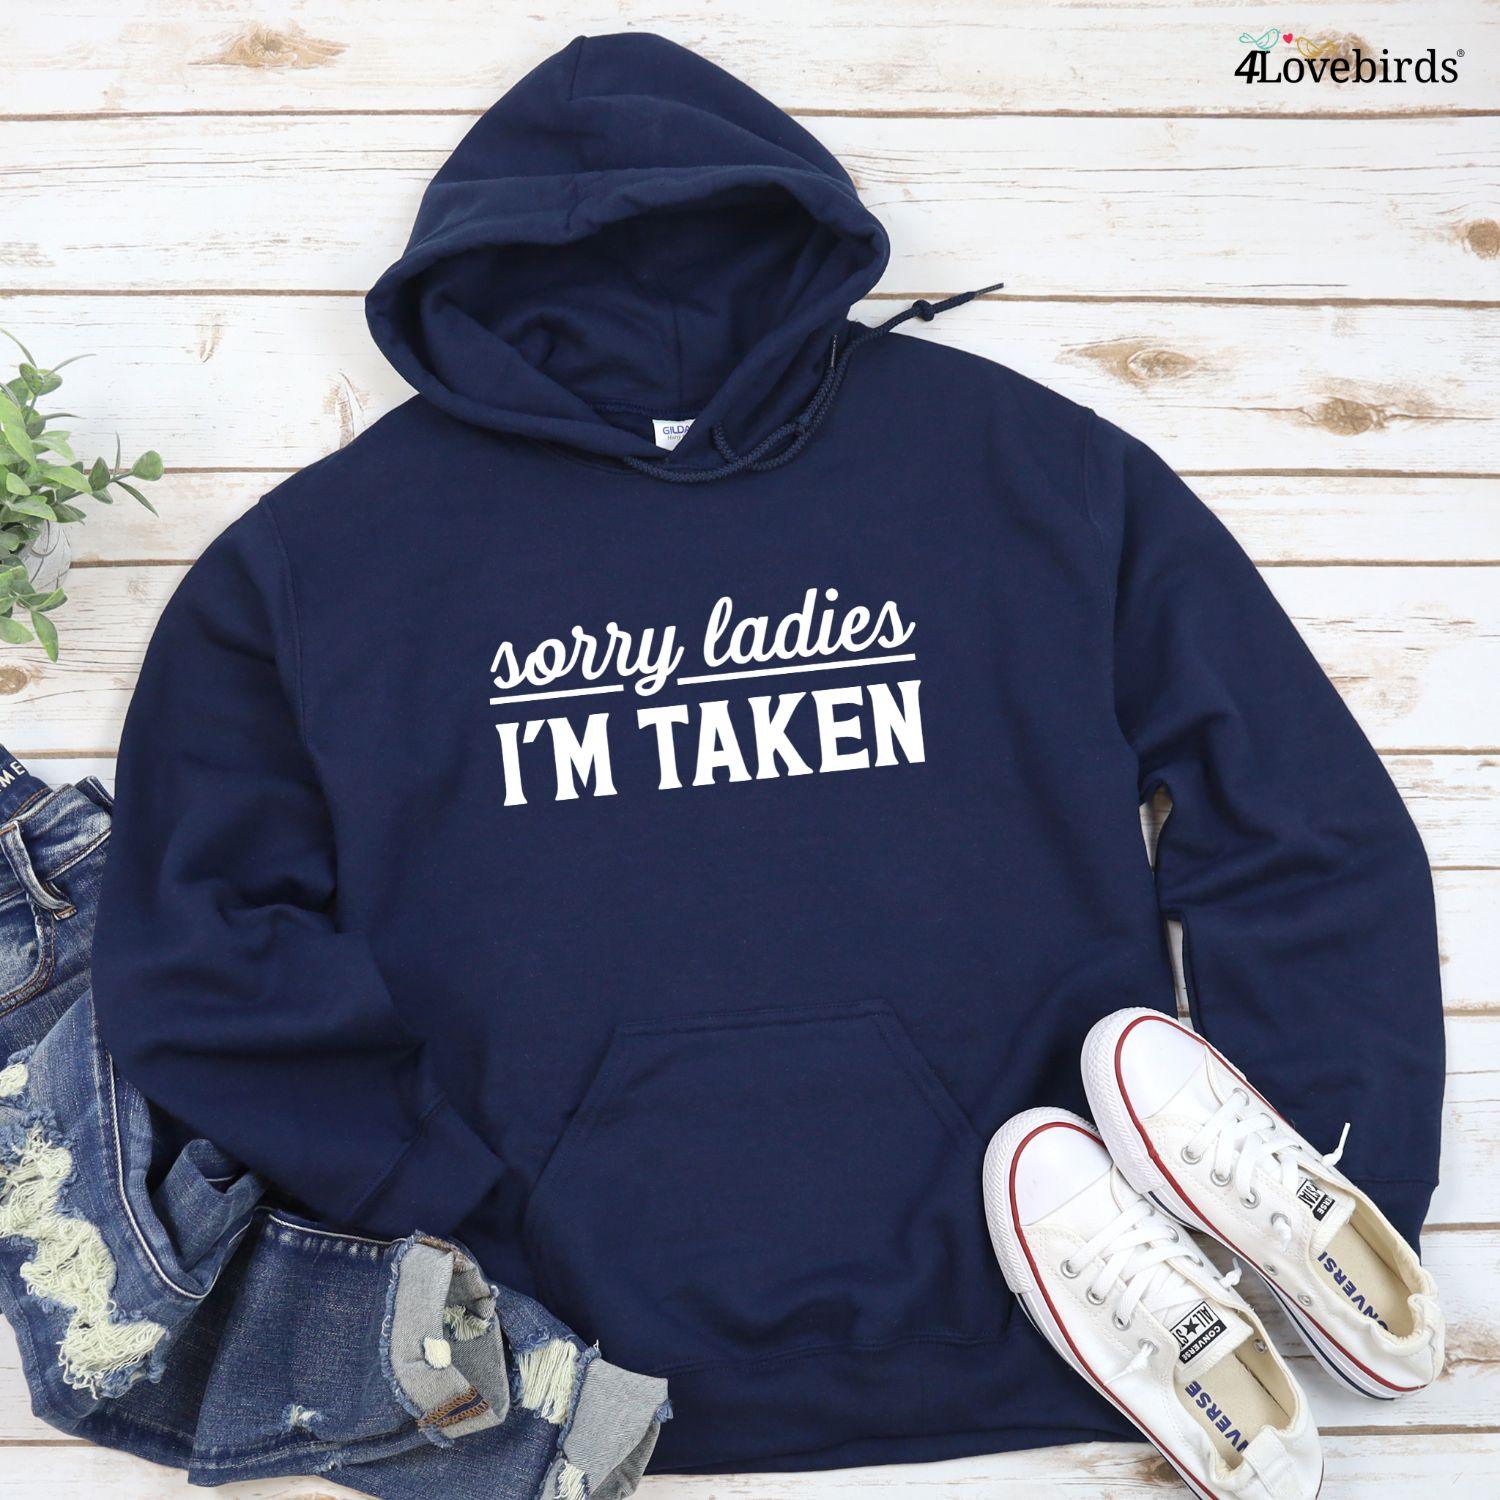 Sorry Ladies/Guys I'm Taken: Hilarious Matching Outfits for Duo, Ideal Bachelorette Gift - 4Lovebirds